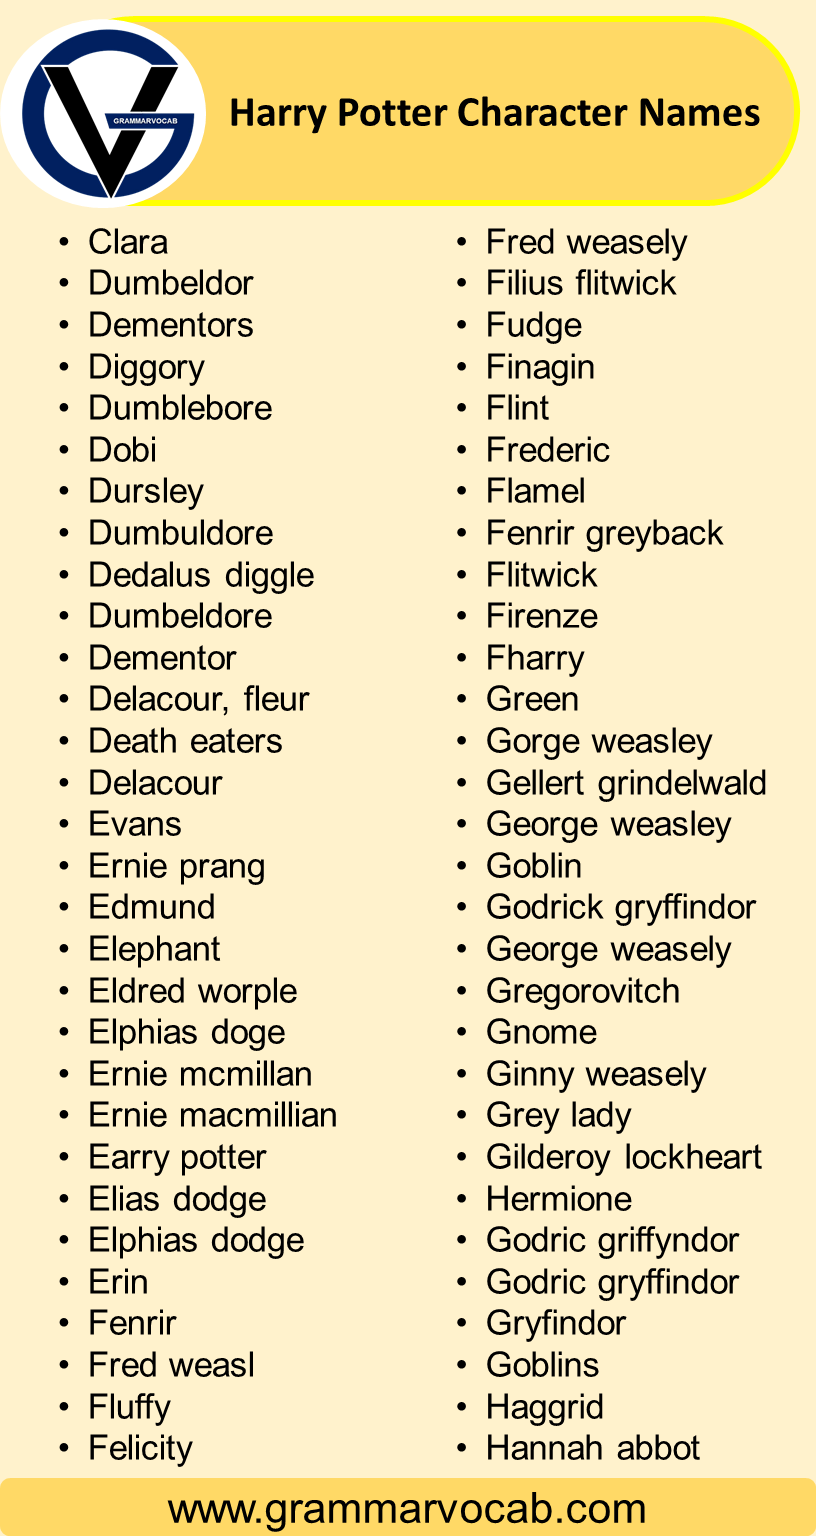 Harry Potter Character Names